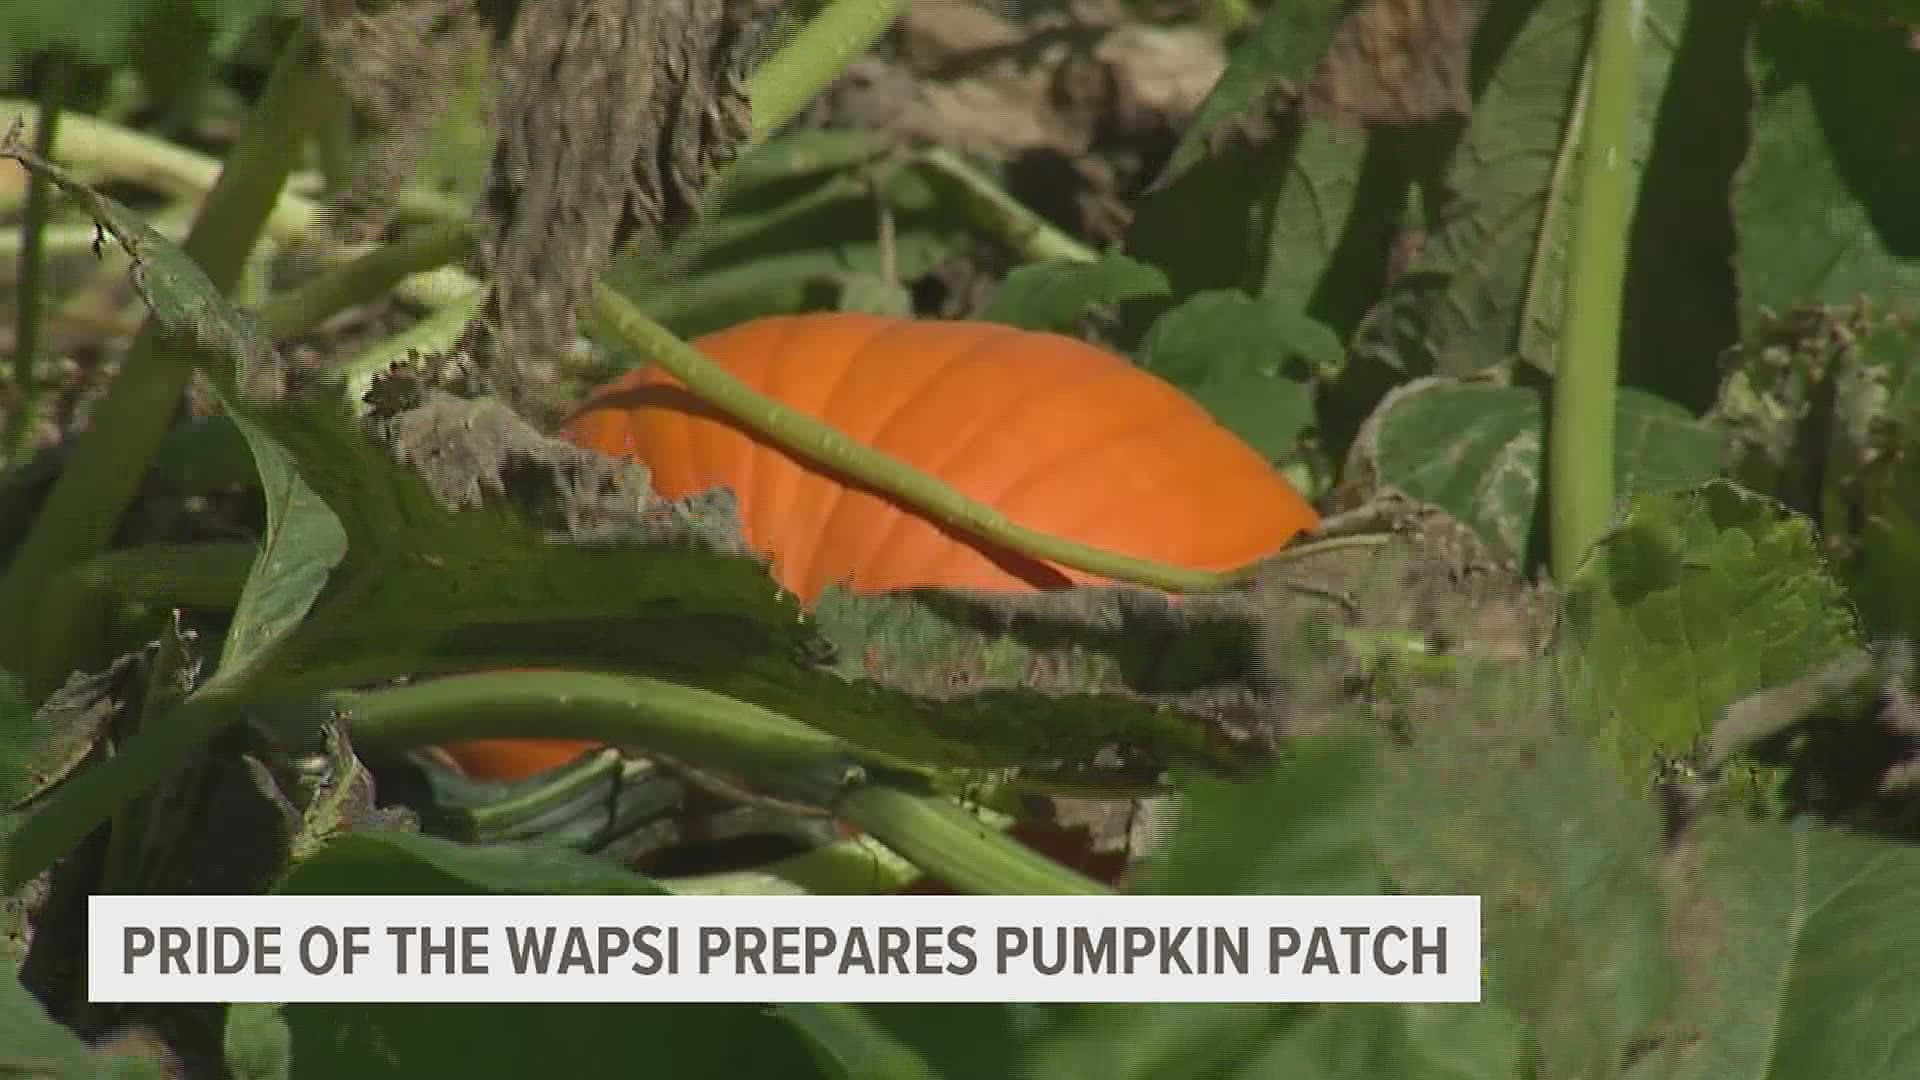 With the first day of fall arriving, Pride of the Wapsi is preparing for its pumpkin patch after facing the increased price of seeds earlier this year.